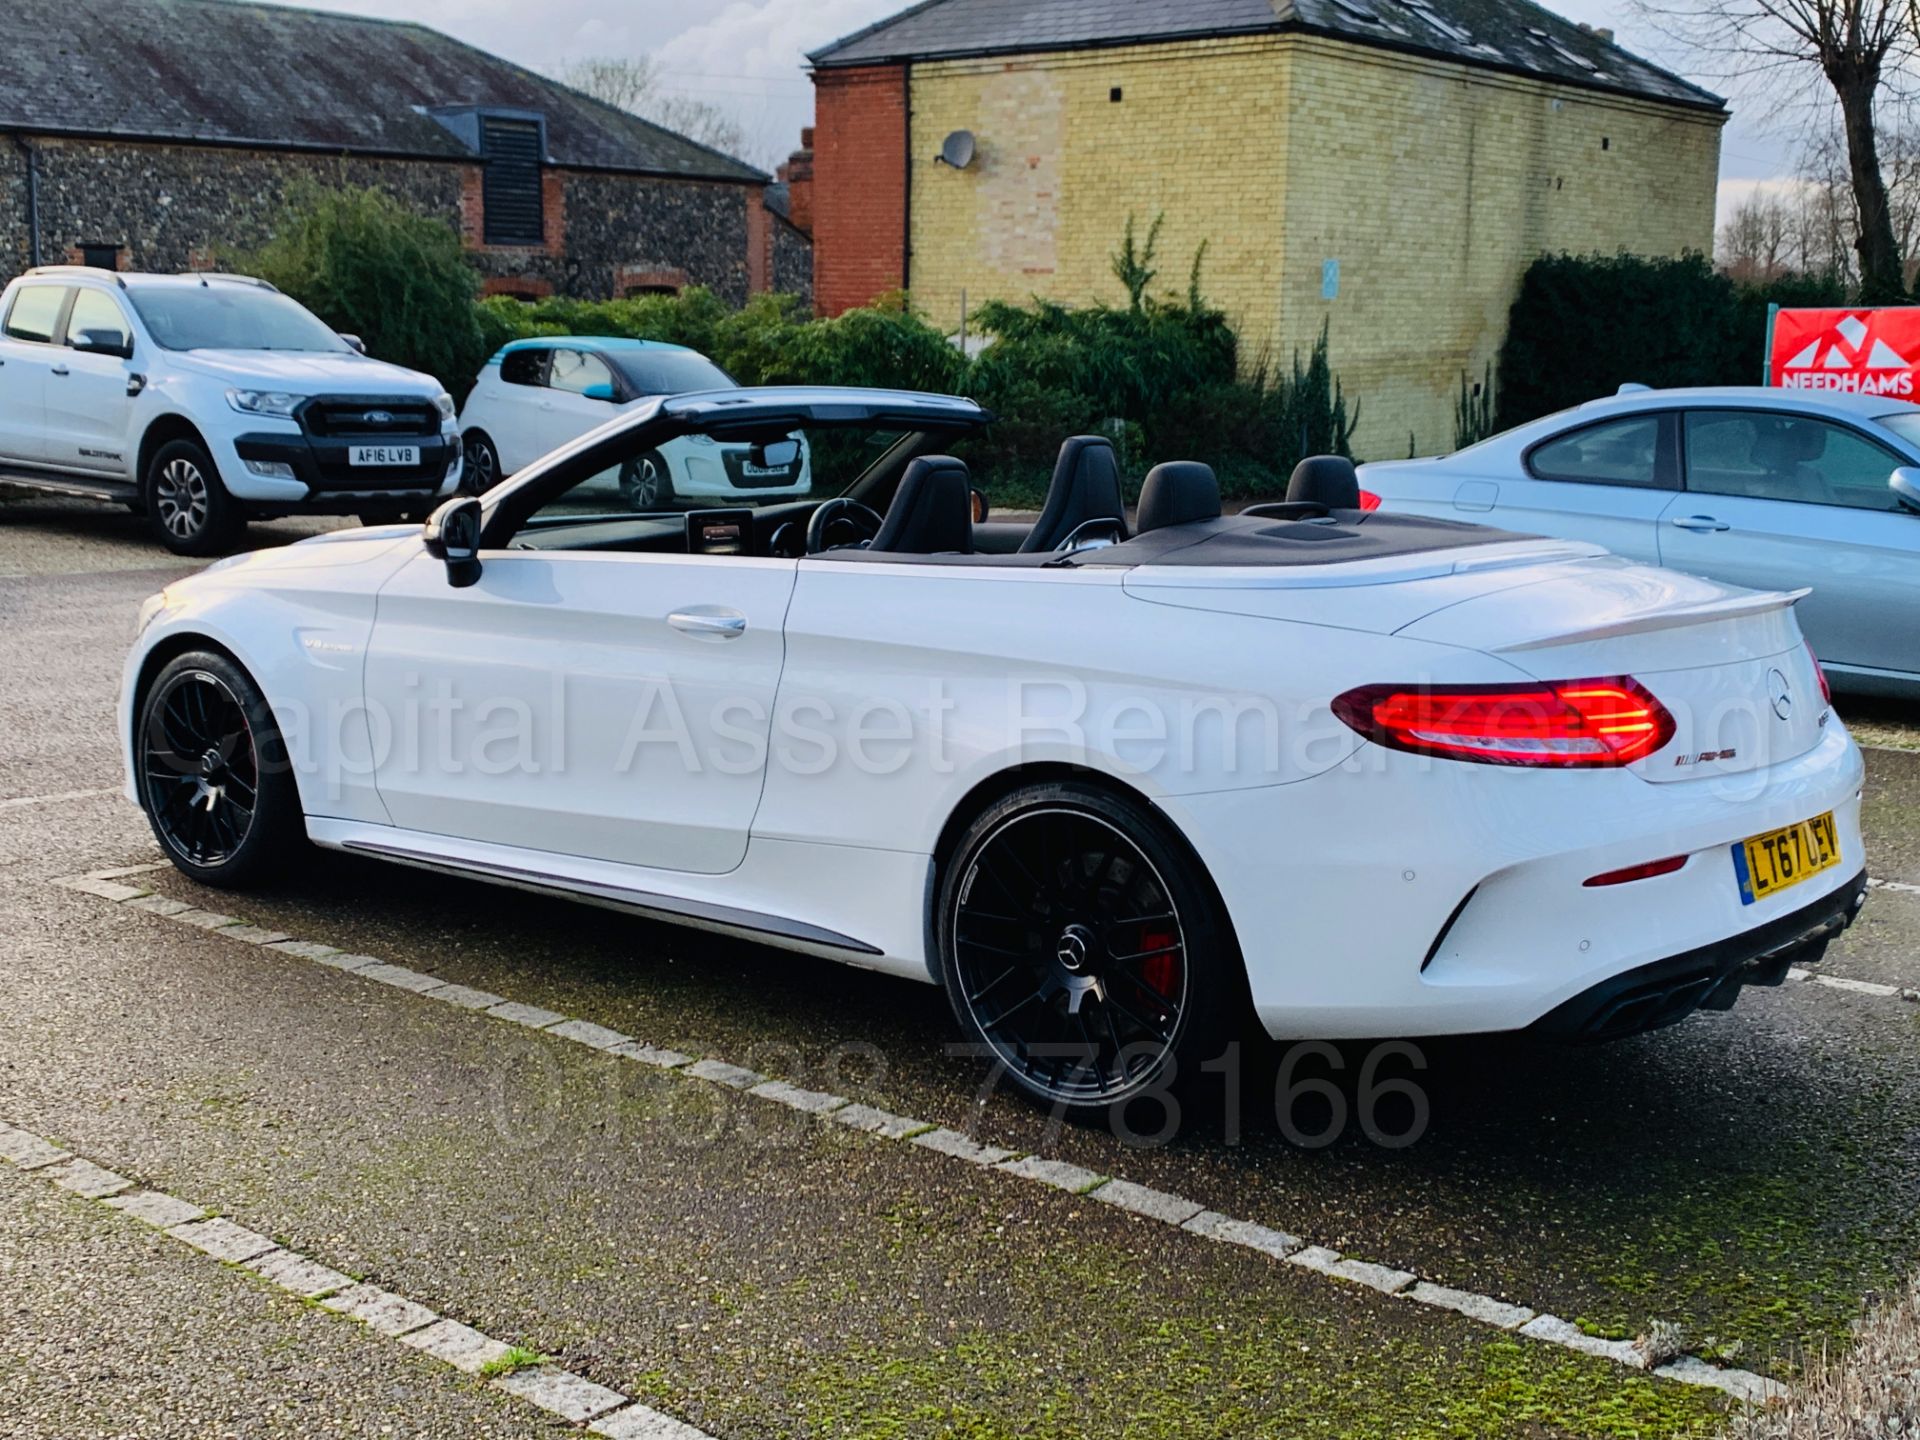 (On Sale) MERCEDES-BENZ AMG C63-S *CABRIOLET* (67 REG) '4.0 BI-TURBO -510 BHP - AUTO' *FULLY LOADED* - Image 15 of 79